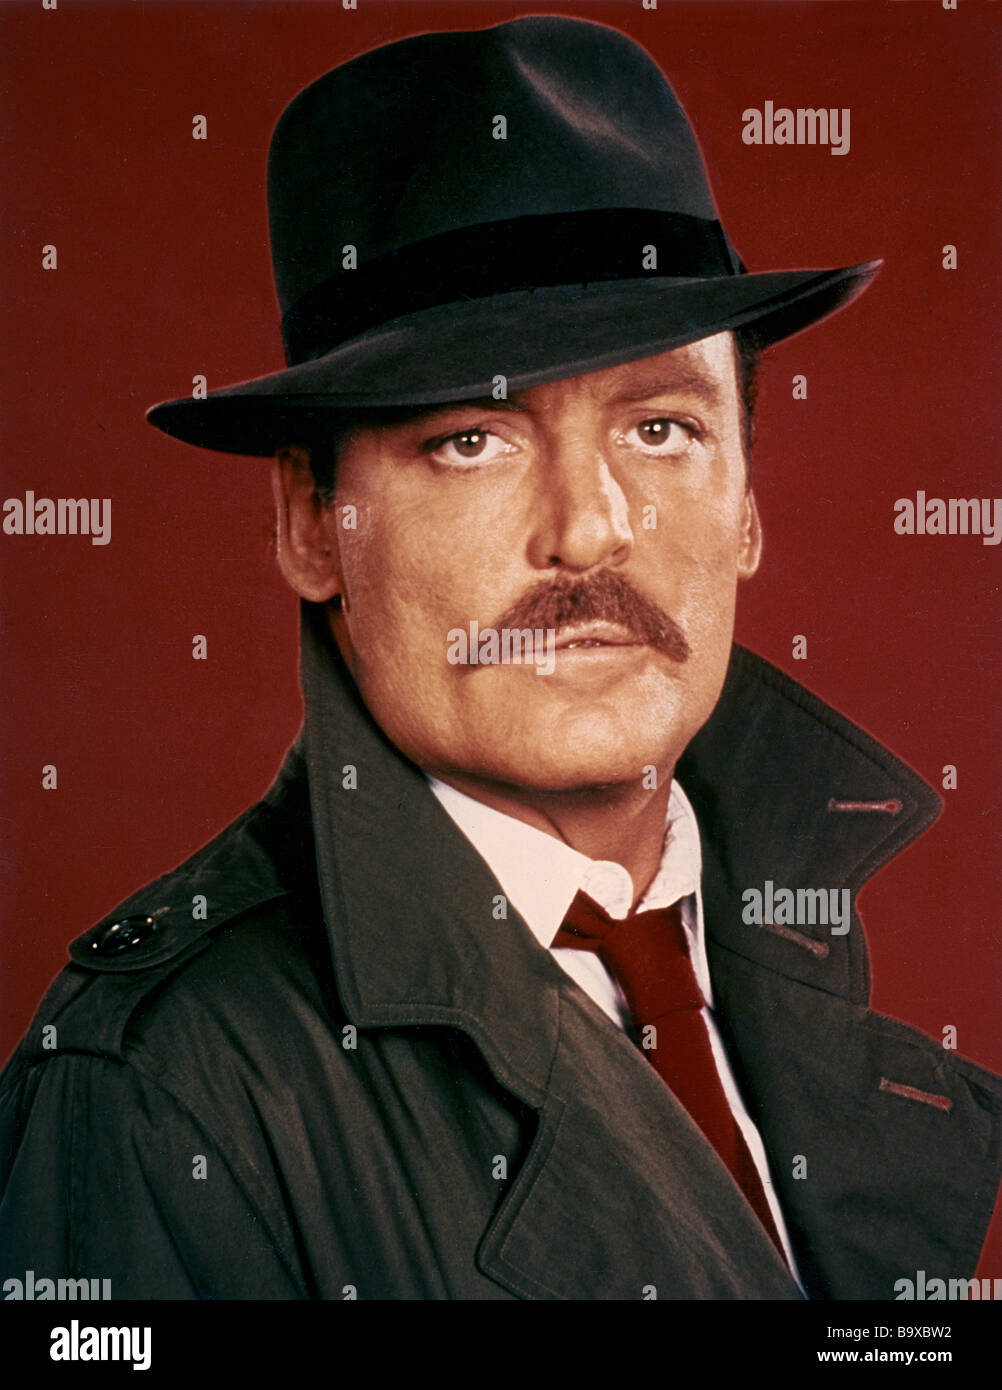 MIKE HAMMER - US TV series with Stacey Keach Stock Photo - Alamy